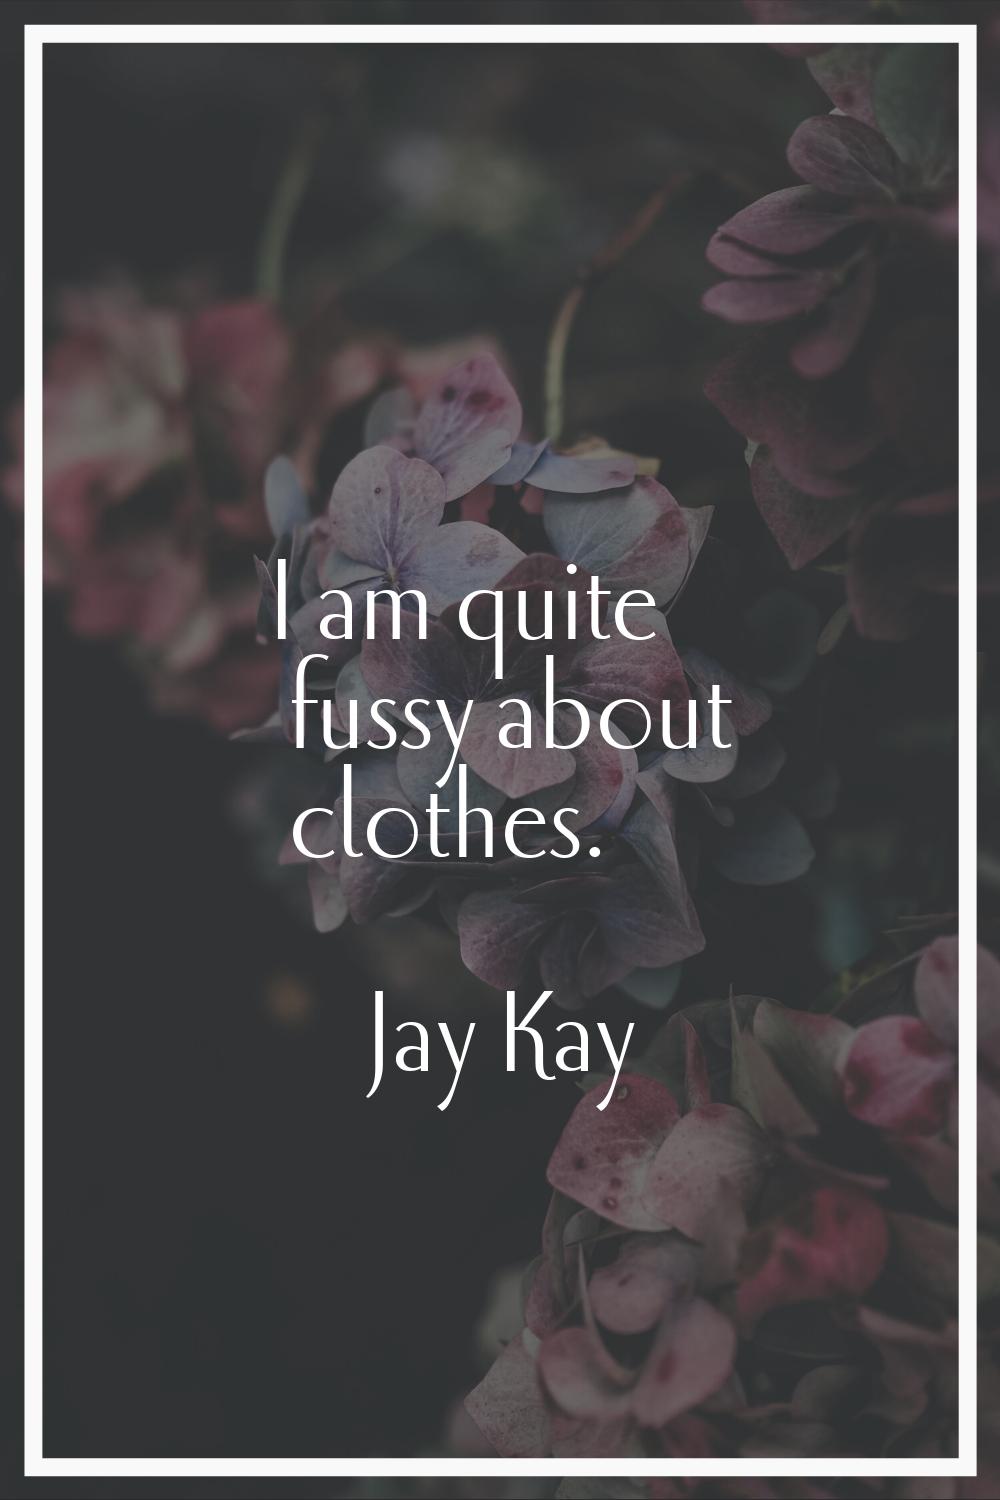 I am quite fussy about clothes.